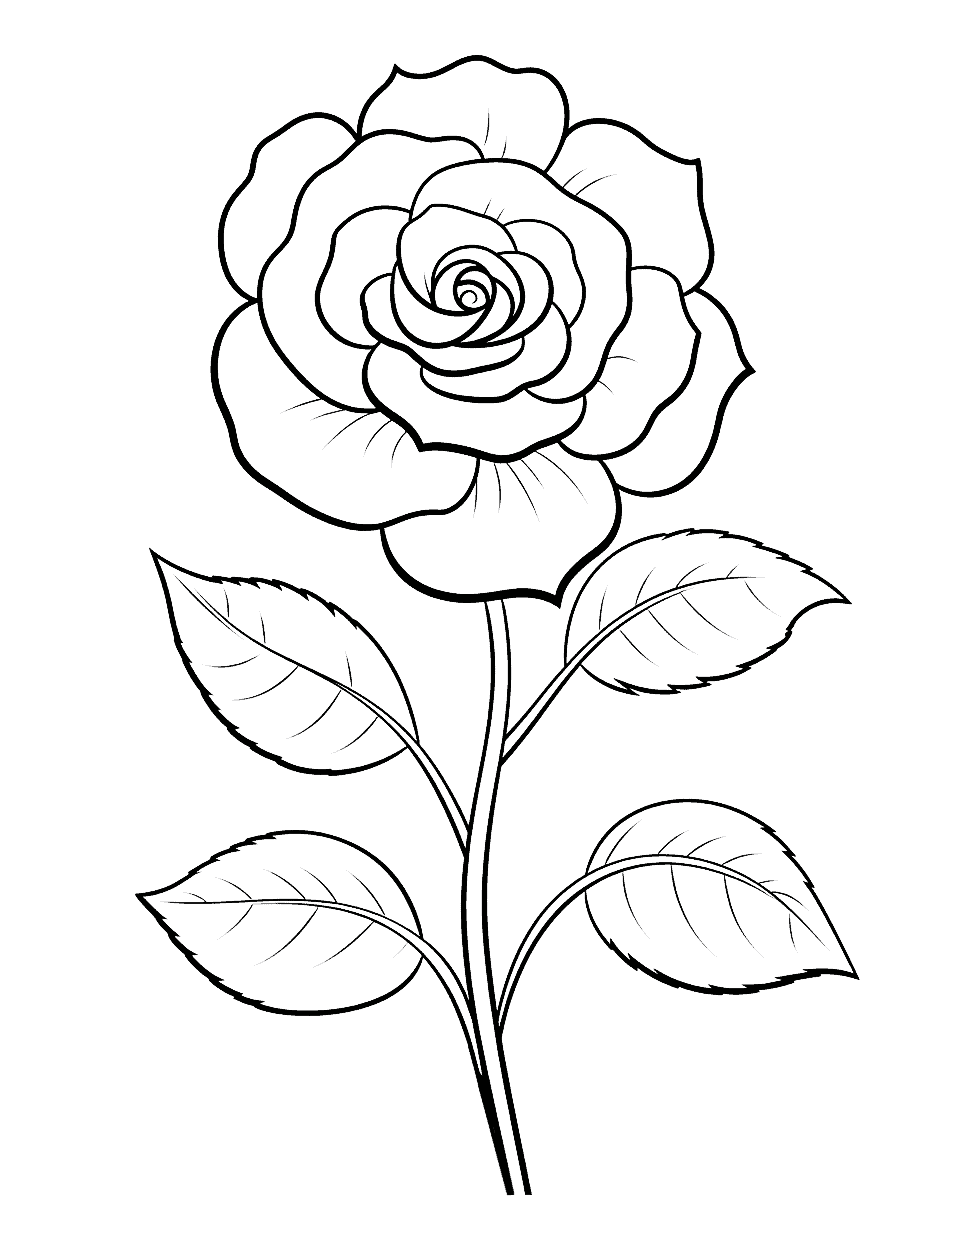 Realistic Rose for Advanced Colorists Flower Coloring Page - A realistic rose drawing, perfect for advanced colorists.